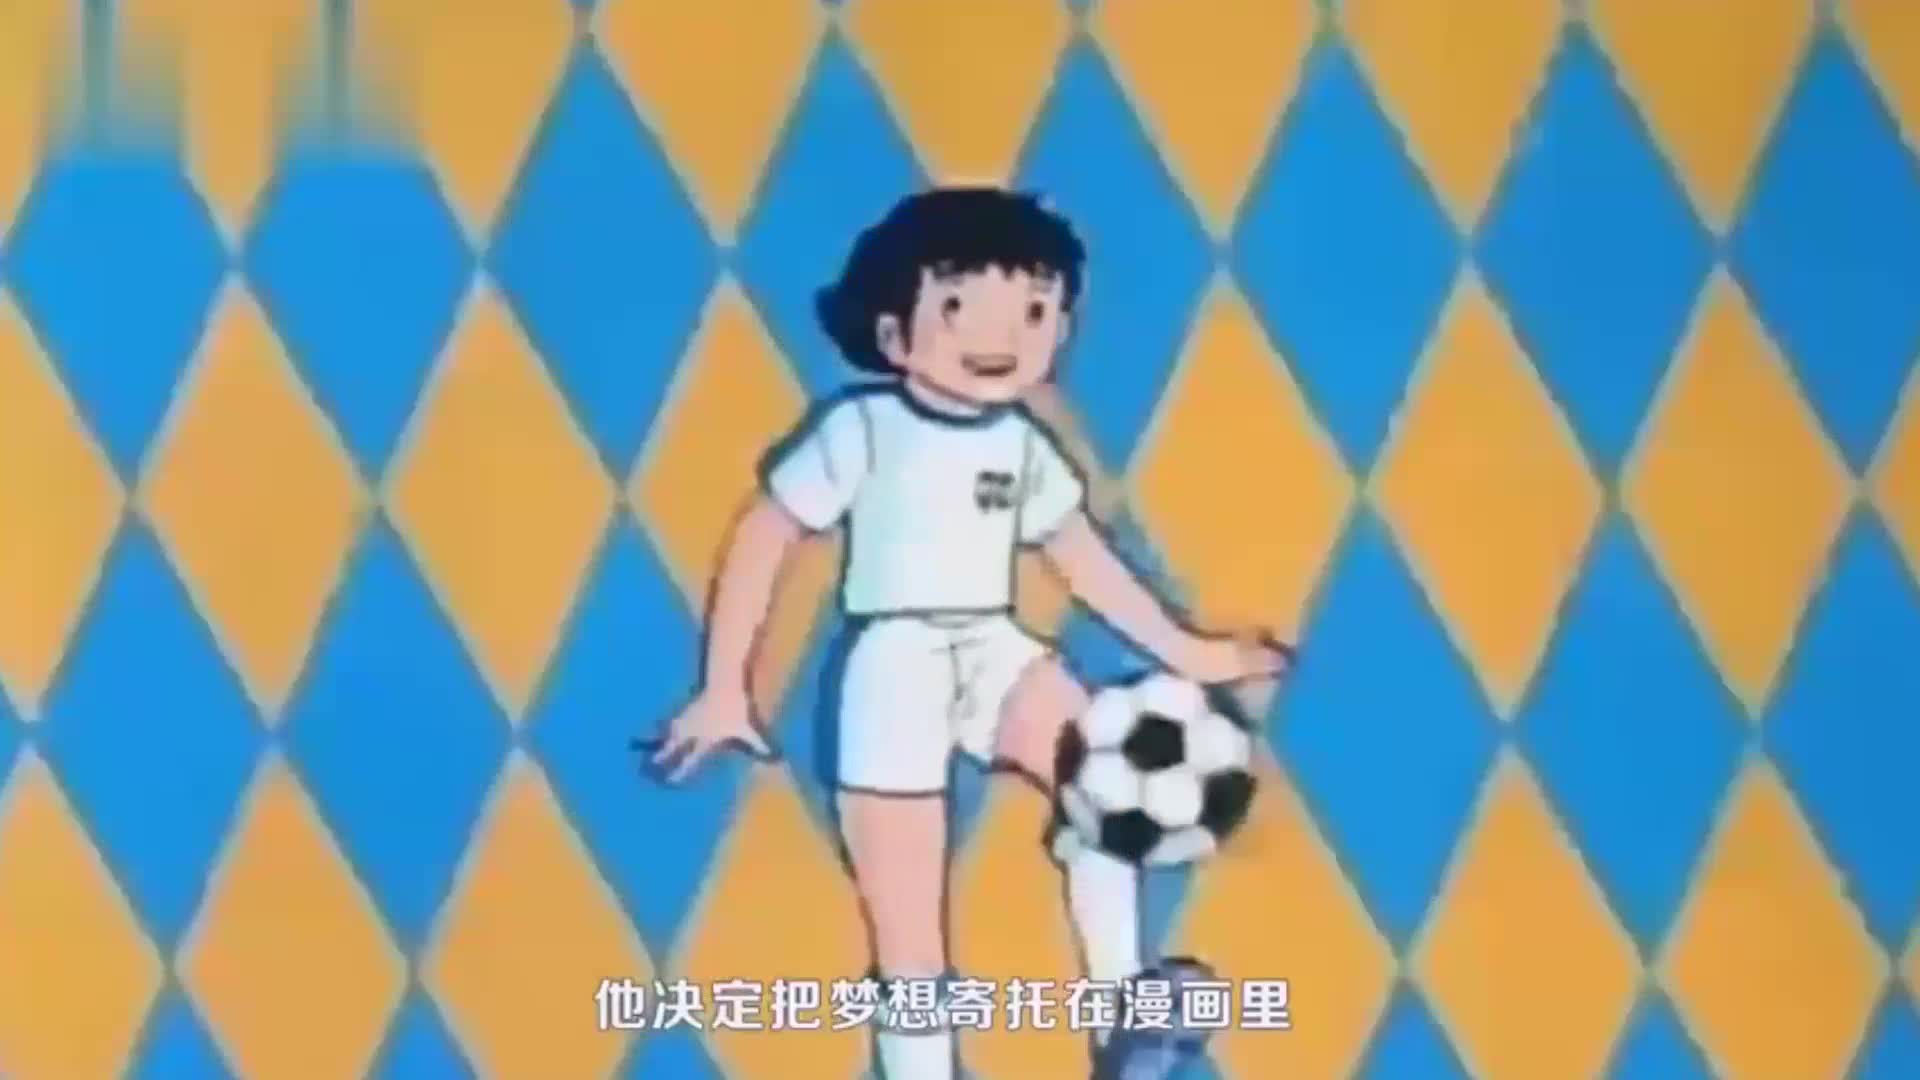 Turning Cartoon into Reality, the Creative Psychological Course Behind Takahashi Yang's "Football Junior"